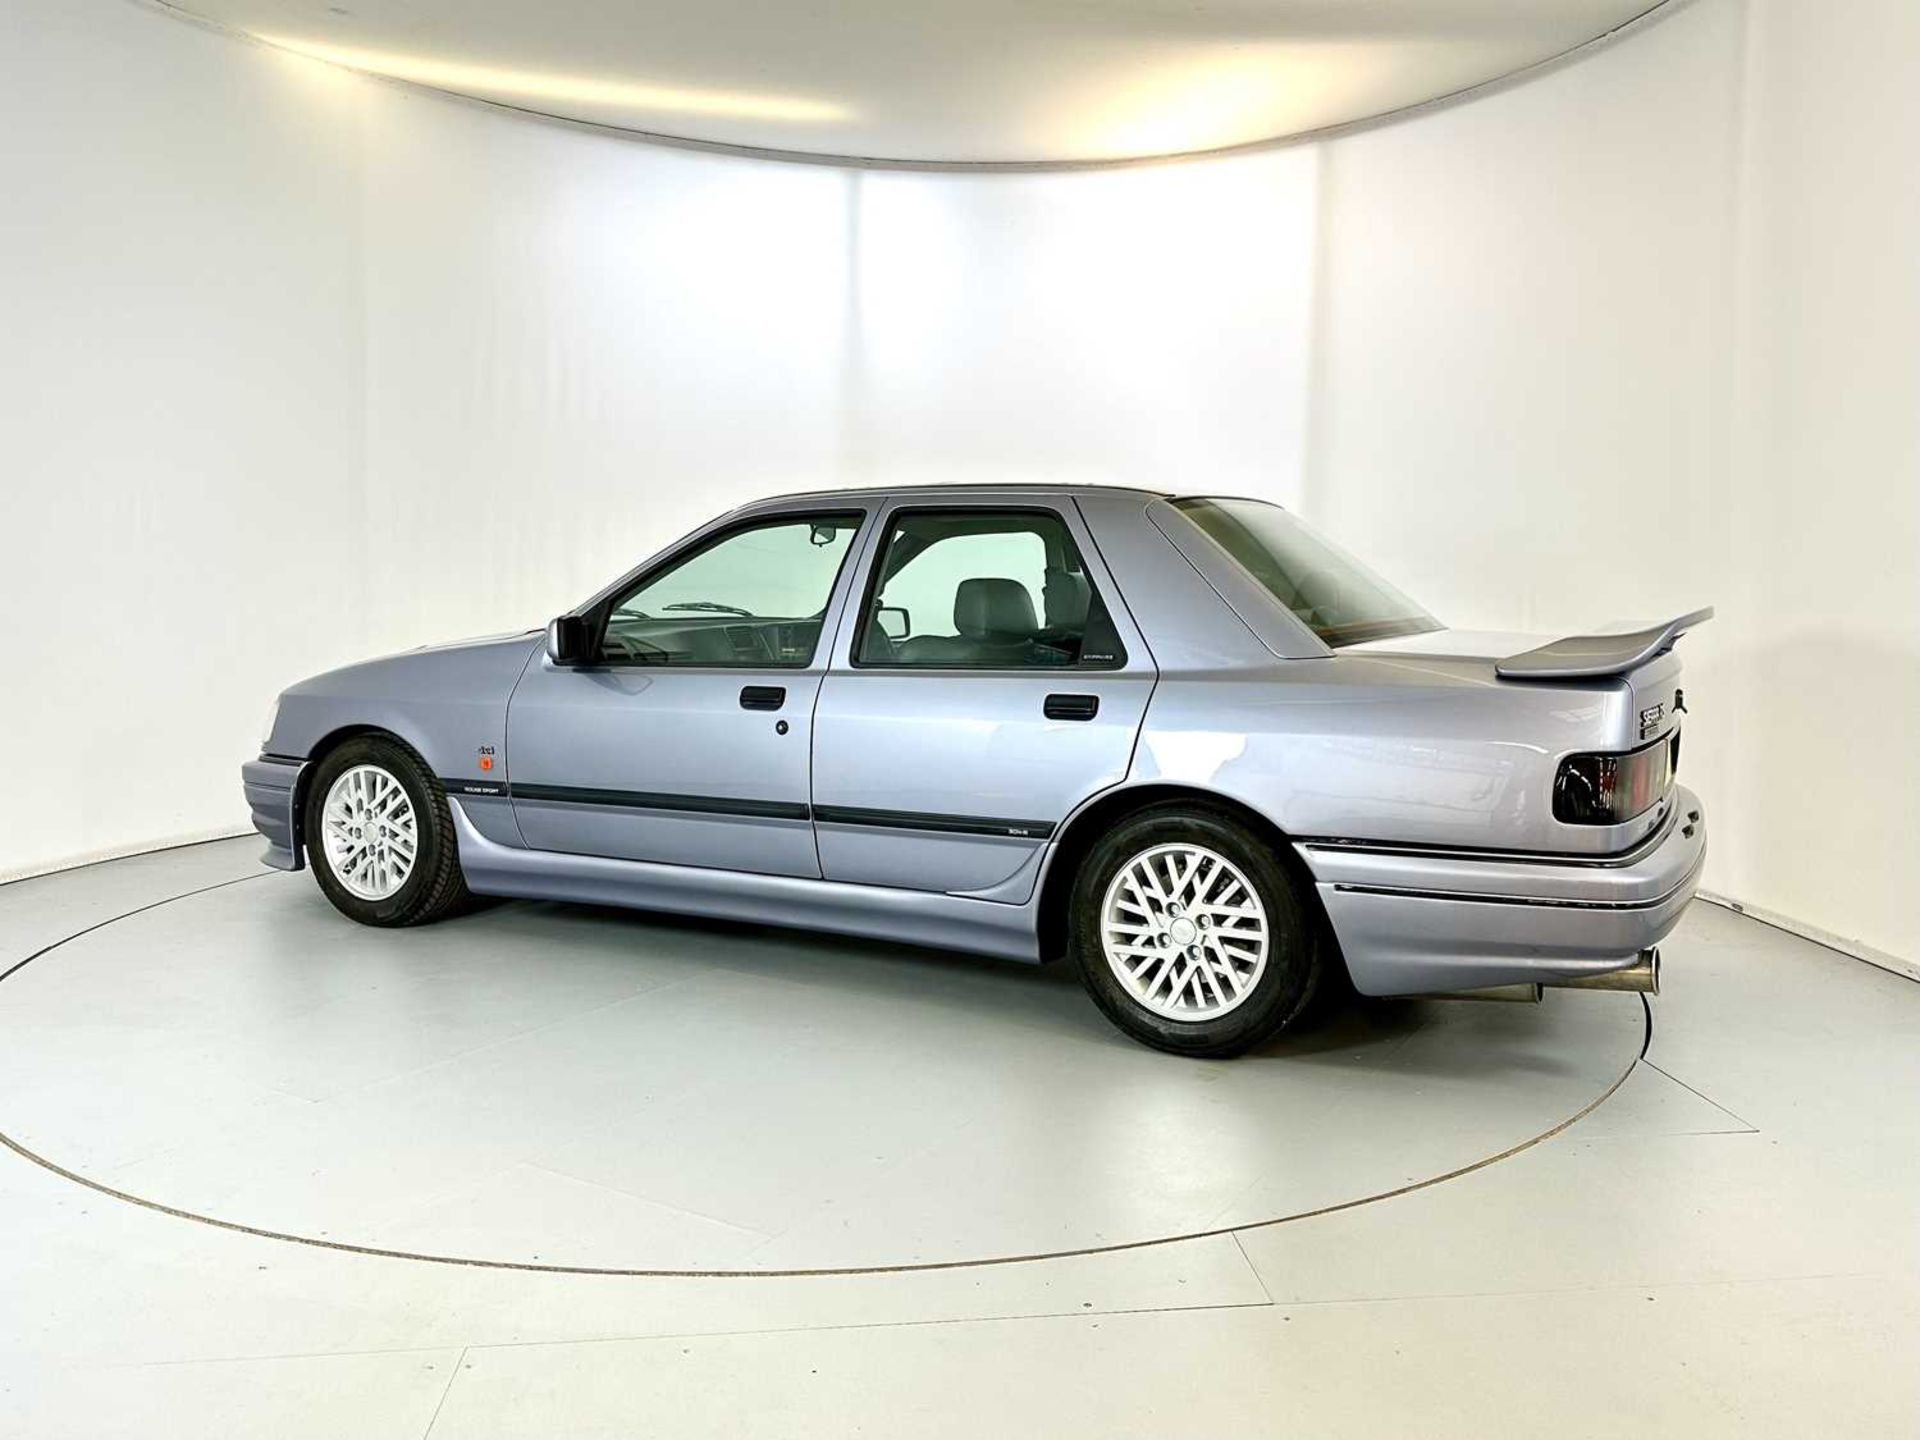 1991 Ford Sierra RS Cosworth Rouse Sport 304R - Image 6 of 40